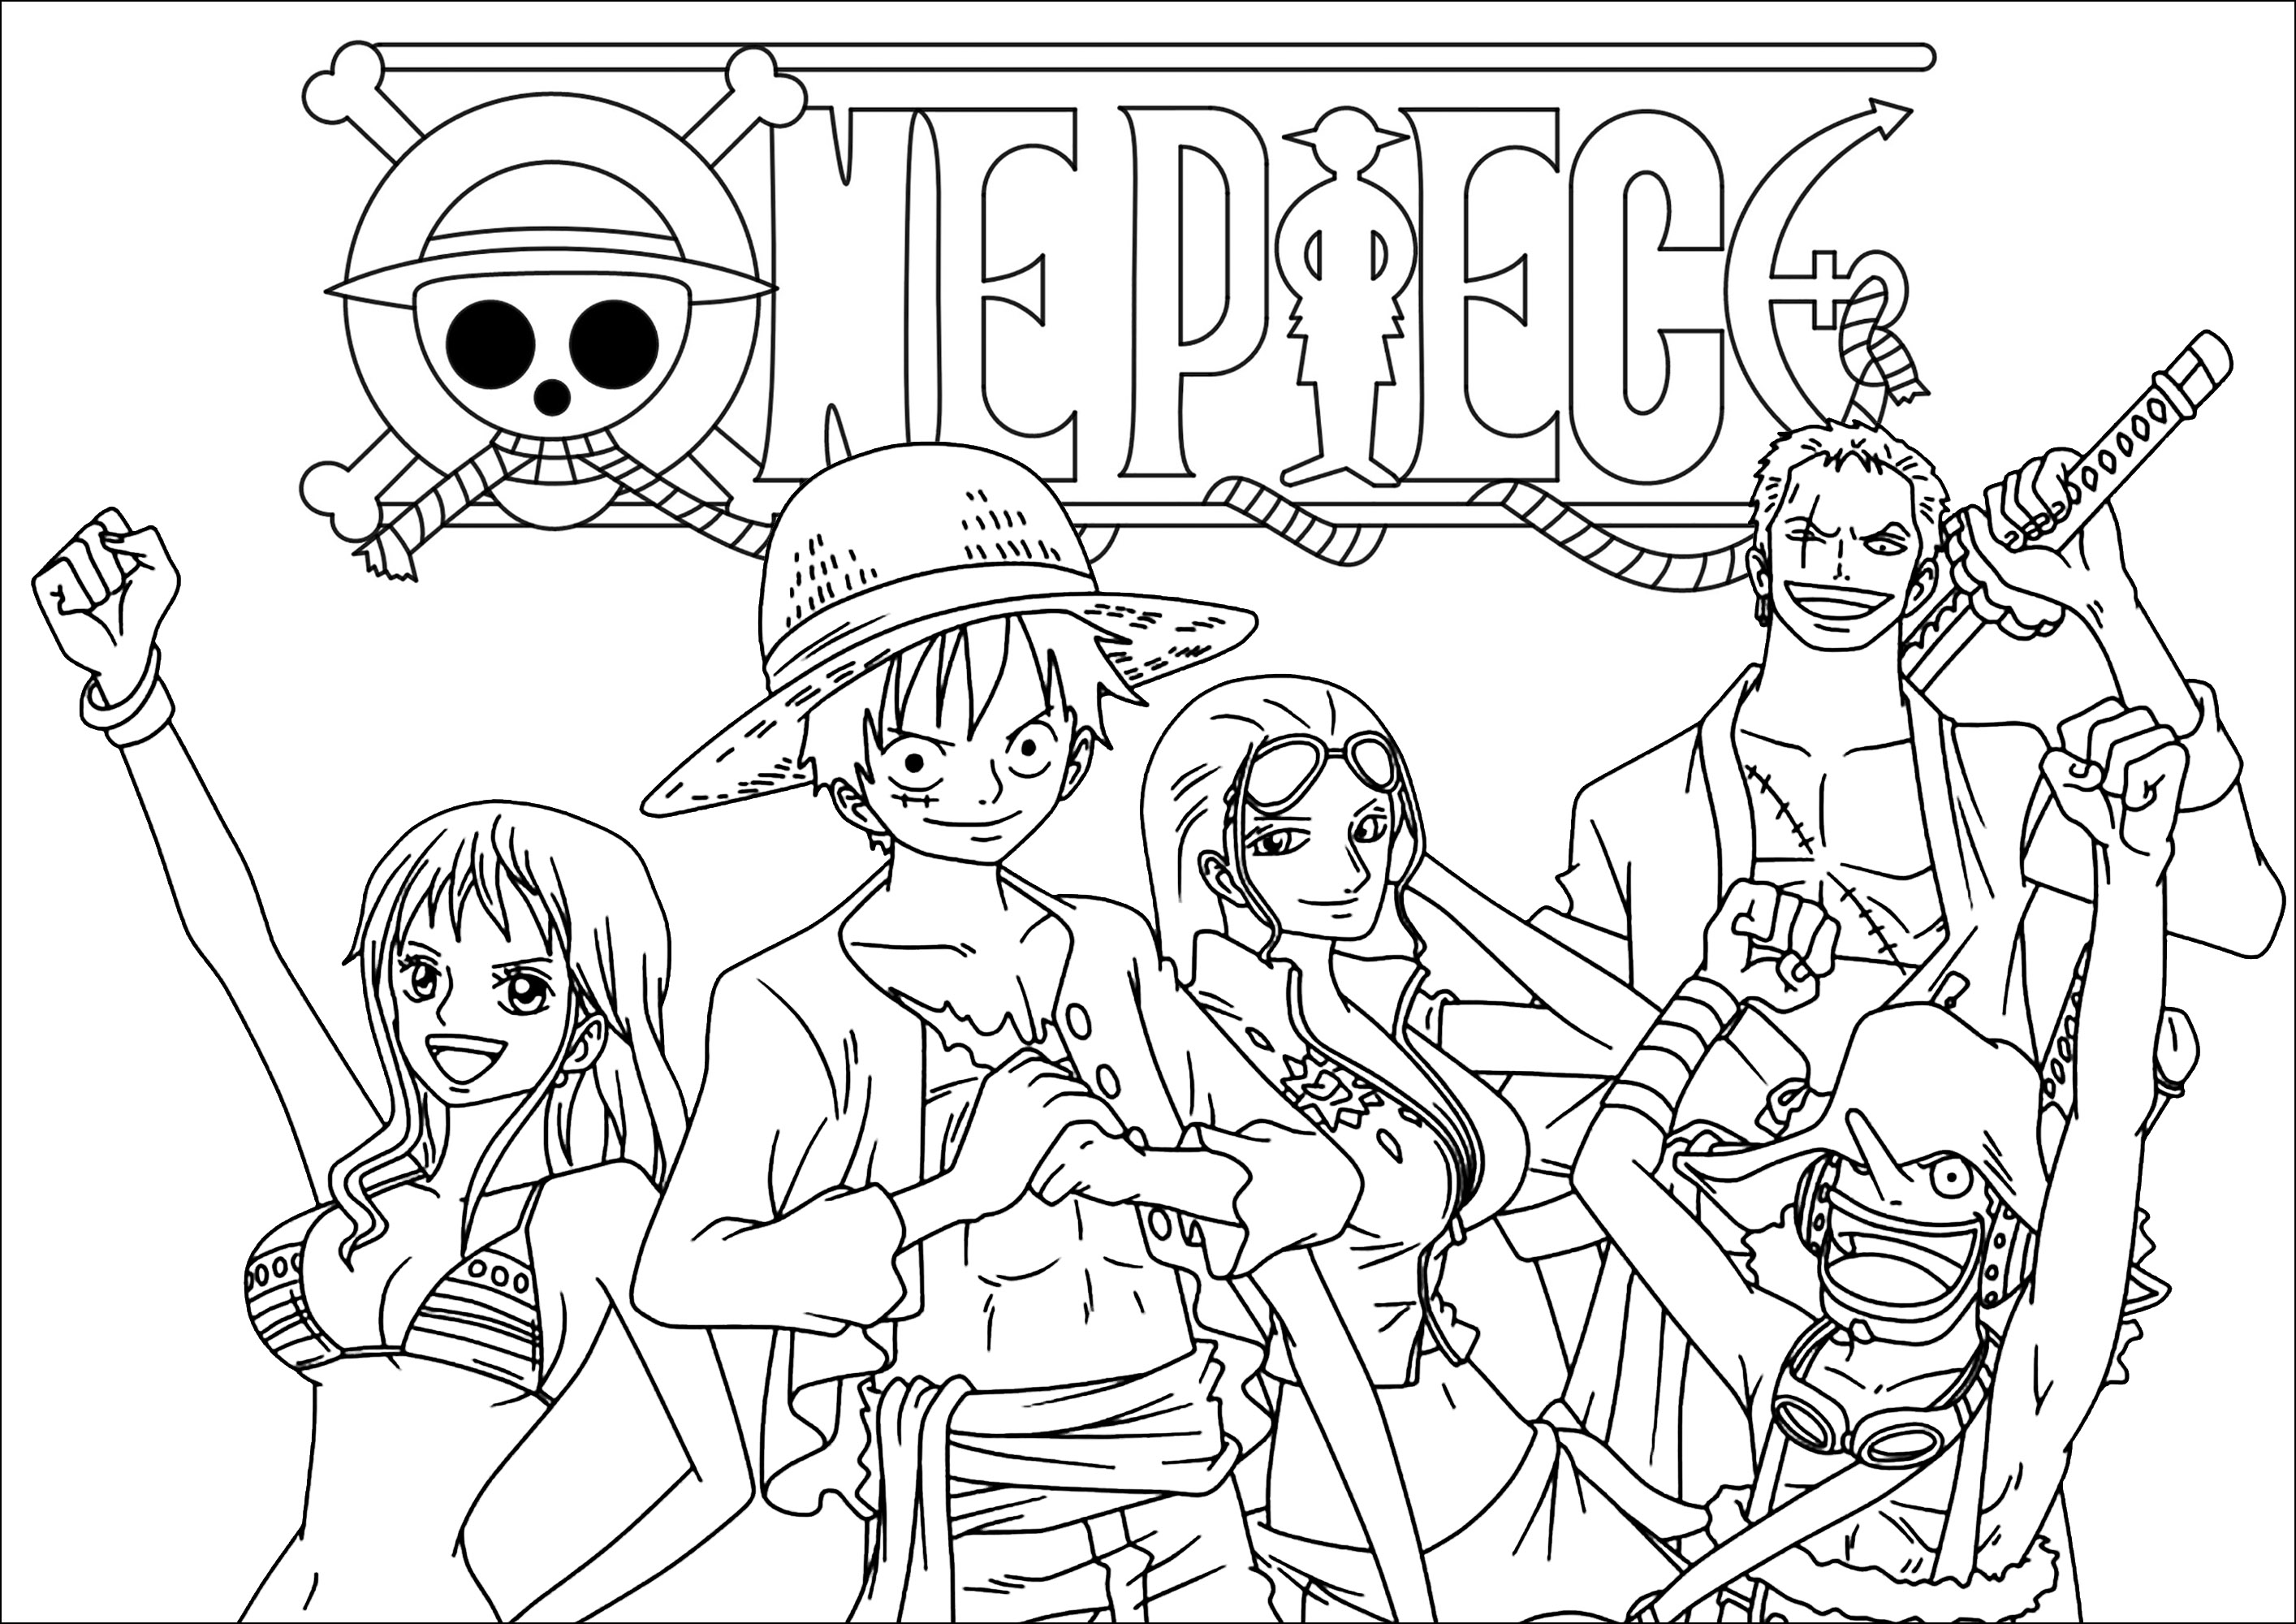 One Piece characters and Logo. Find Monkey D. Luffy, Roronoa Zoro, Nami and other characters to color.